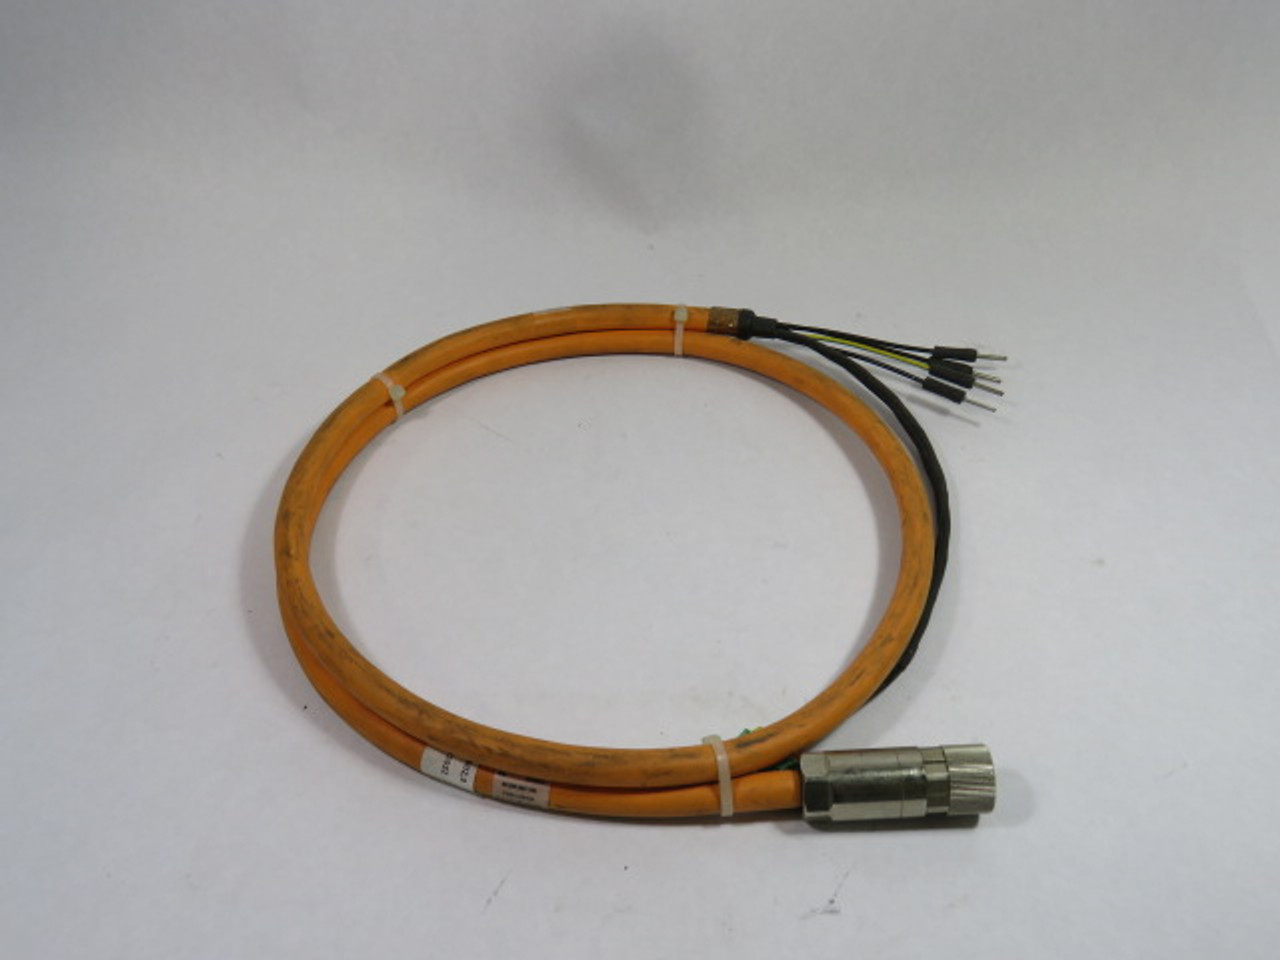 Rexroth IKG4077/002.0 Connection Cable Female End 600V 5ft USED